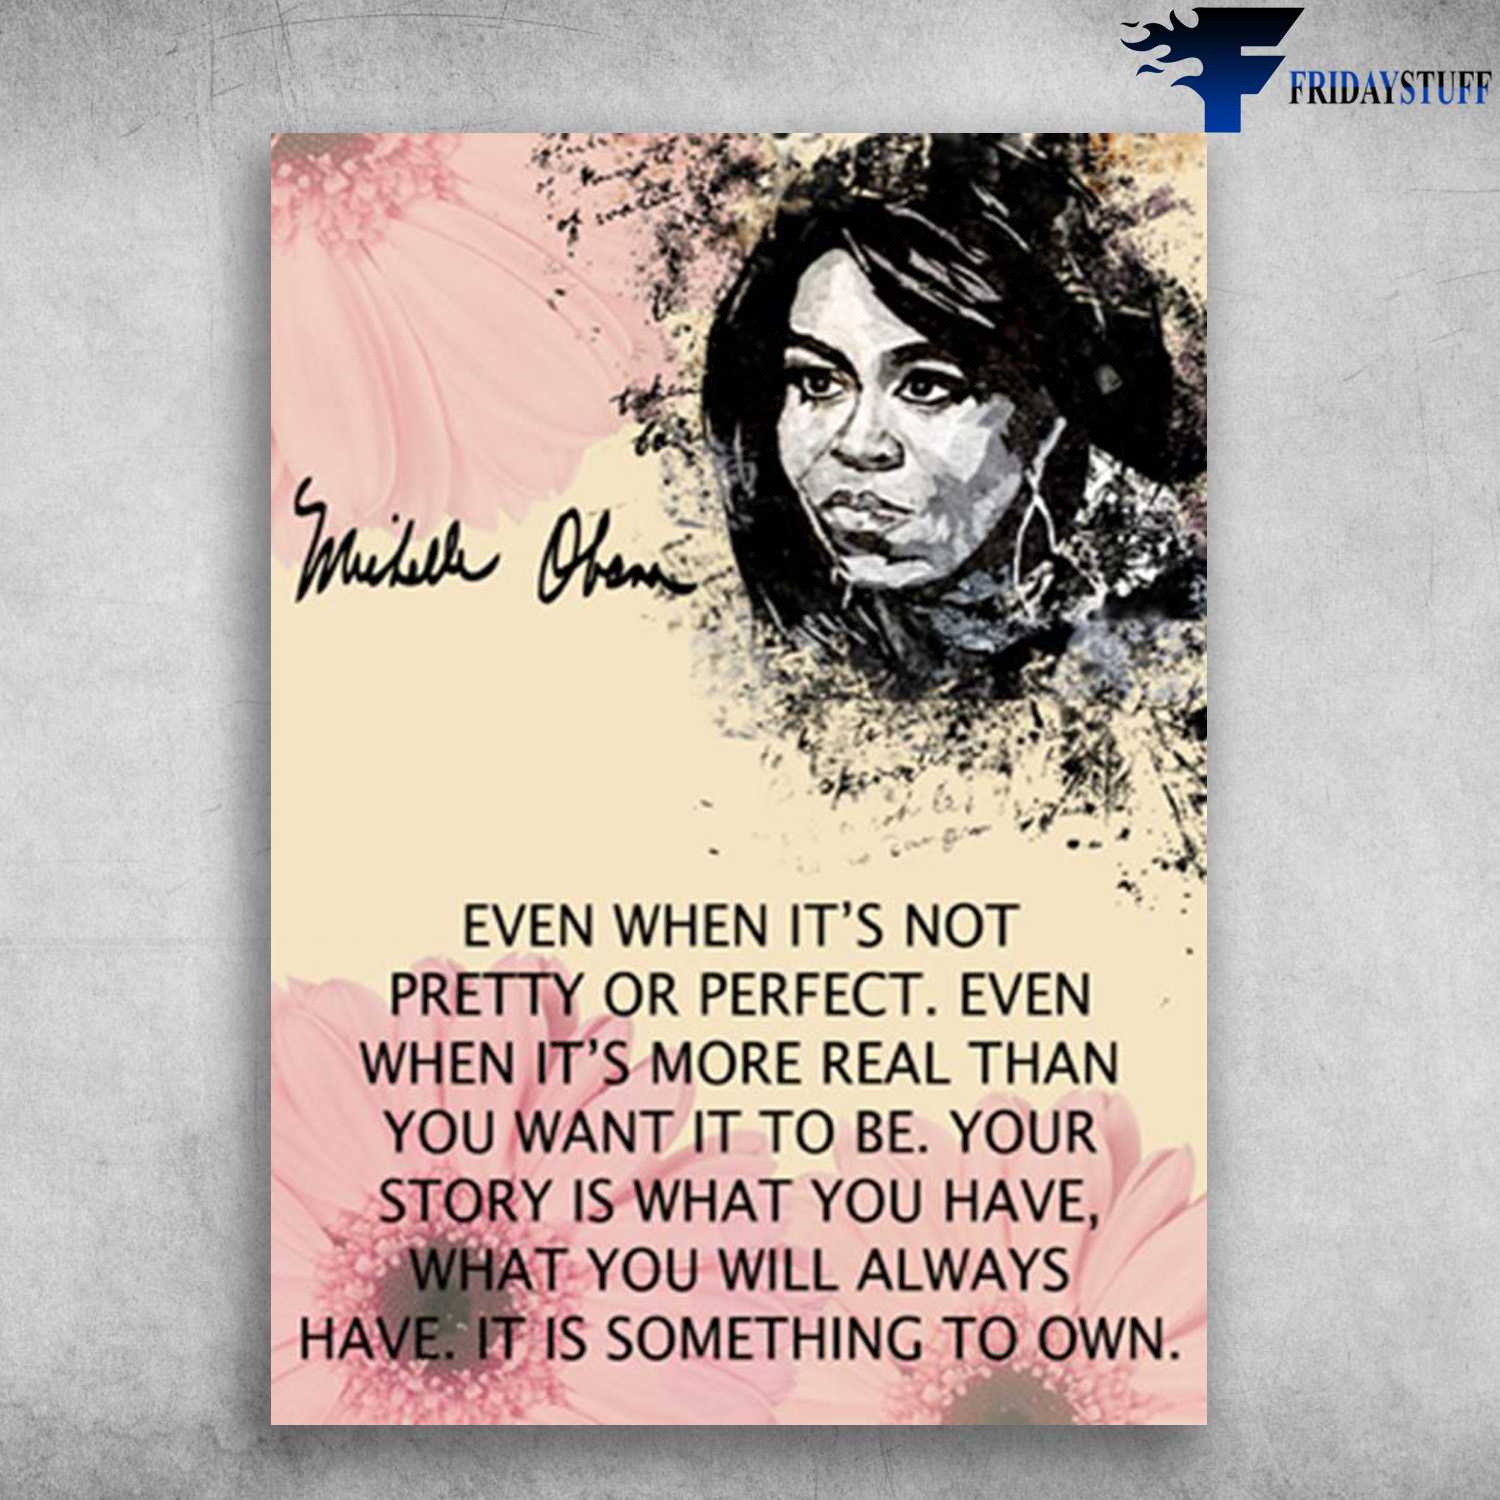 Michelle Obama - Even When It's Not Pretty Or Perfect, Even When It's More Real Than You Want It To Be, Your Story Is What You Have, What You Will Always Have, It Is Something To Own